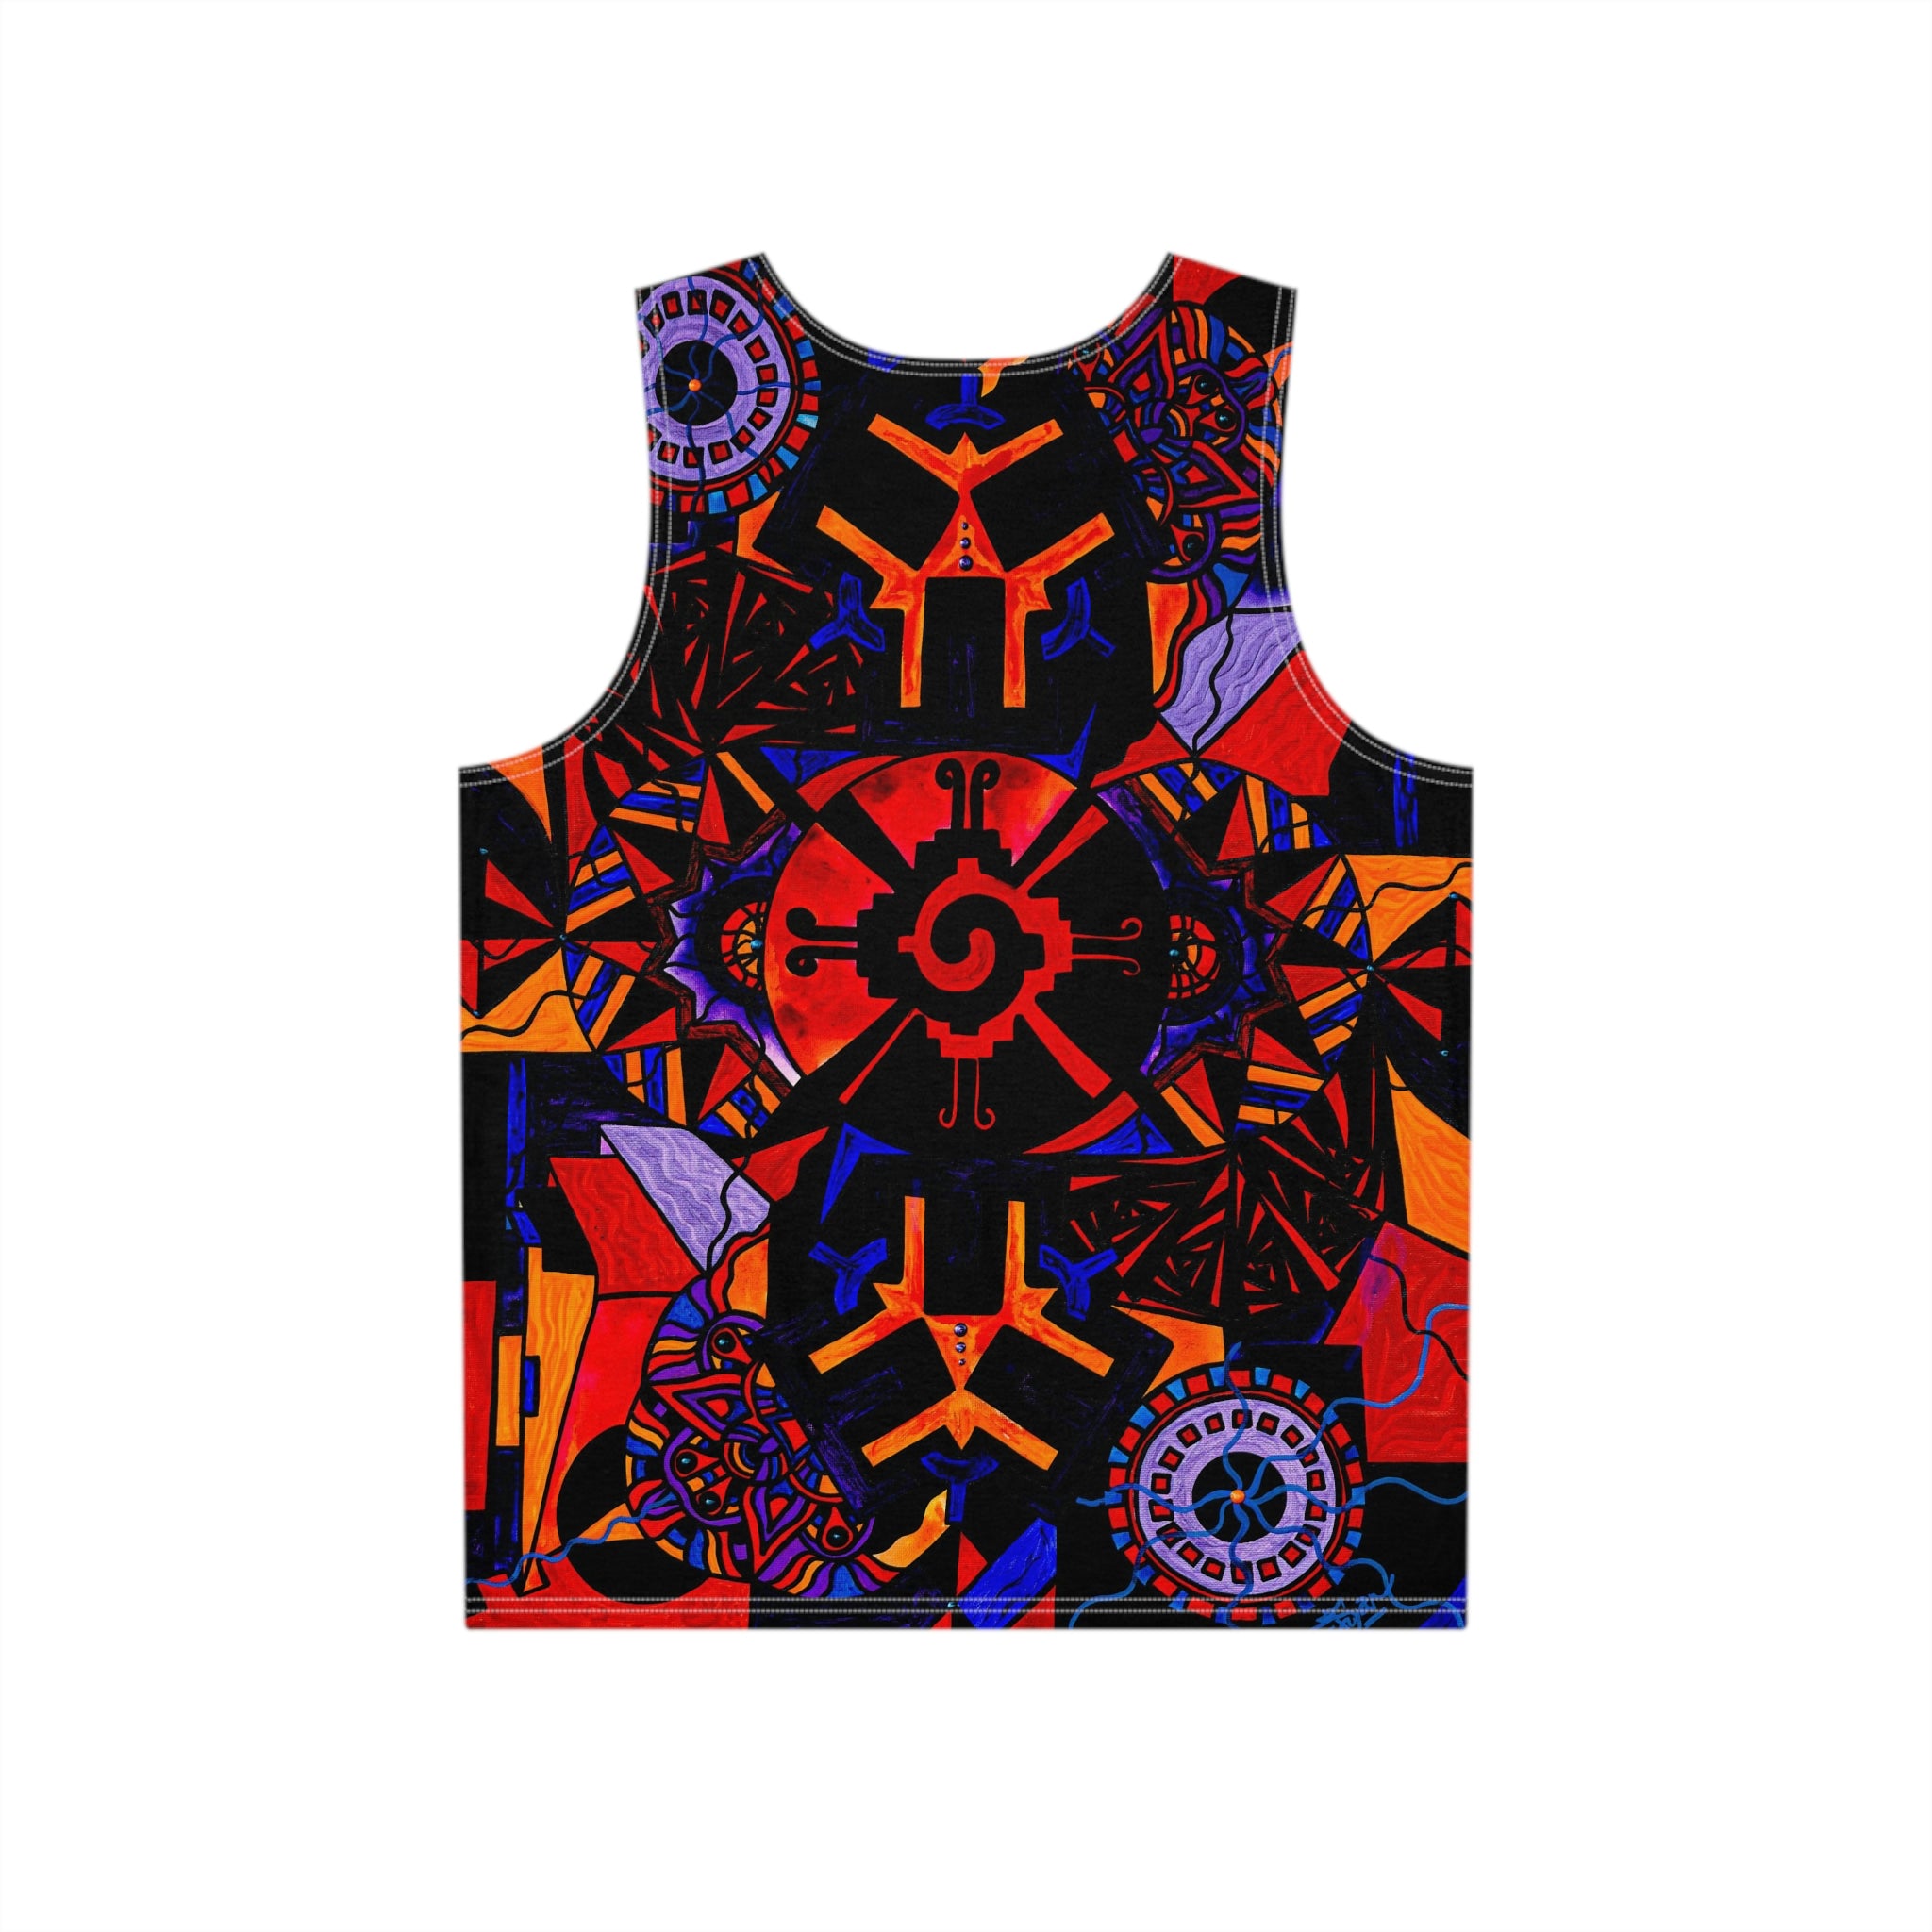 shop-for-the-latest-alnilam-strength-grid-mens-all-over-print-tank-top-fashion_2.jpg